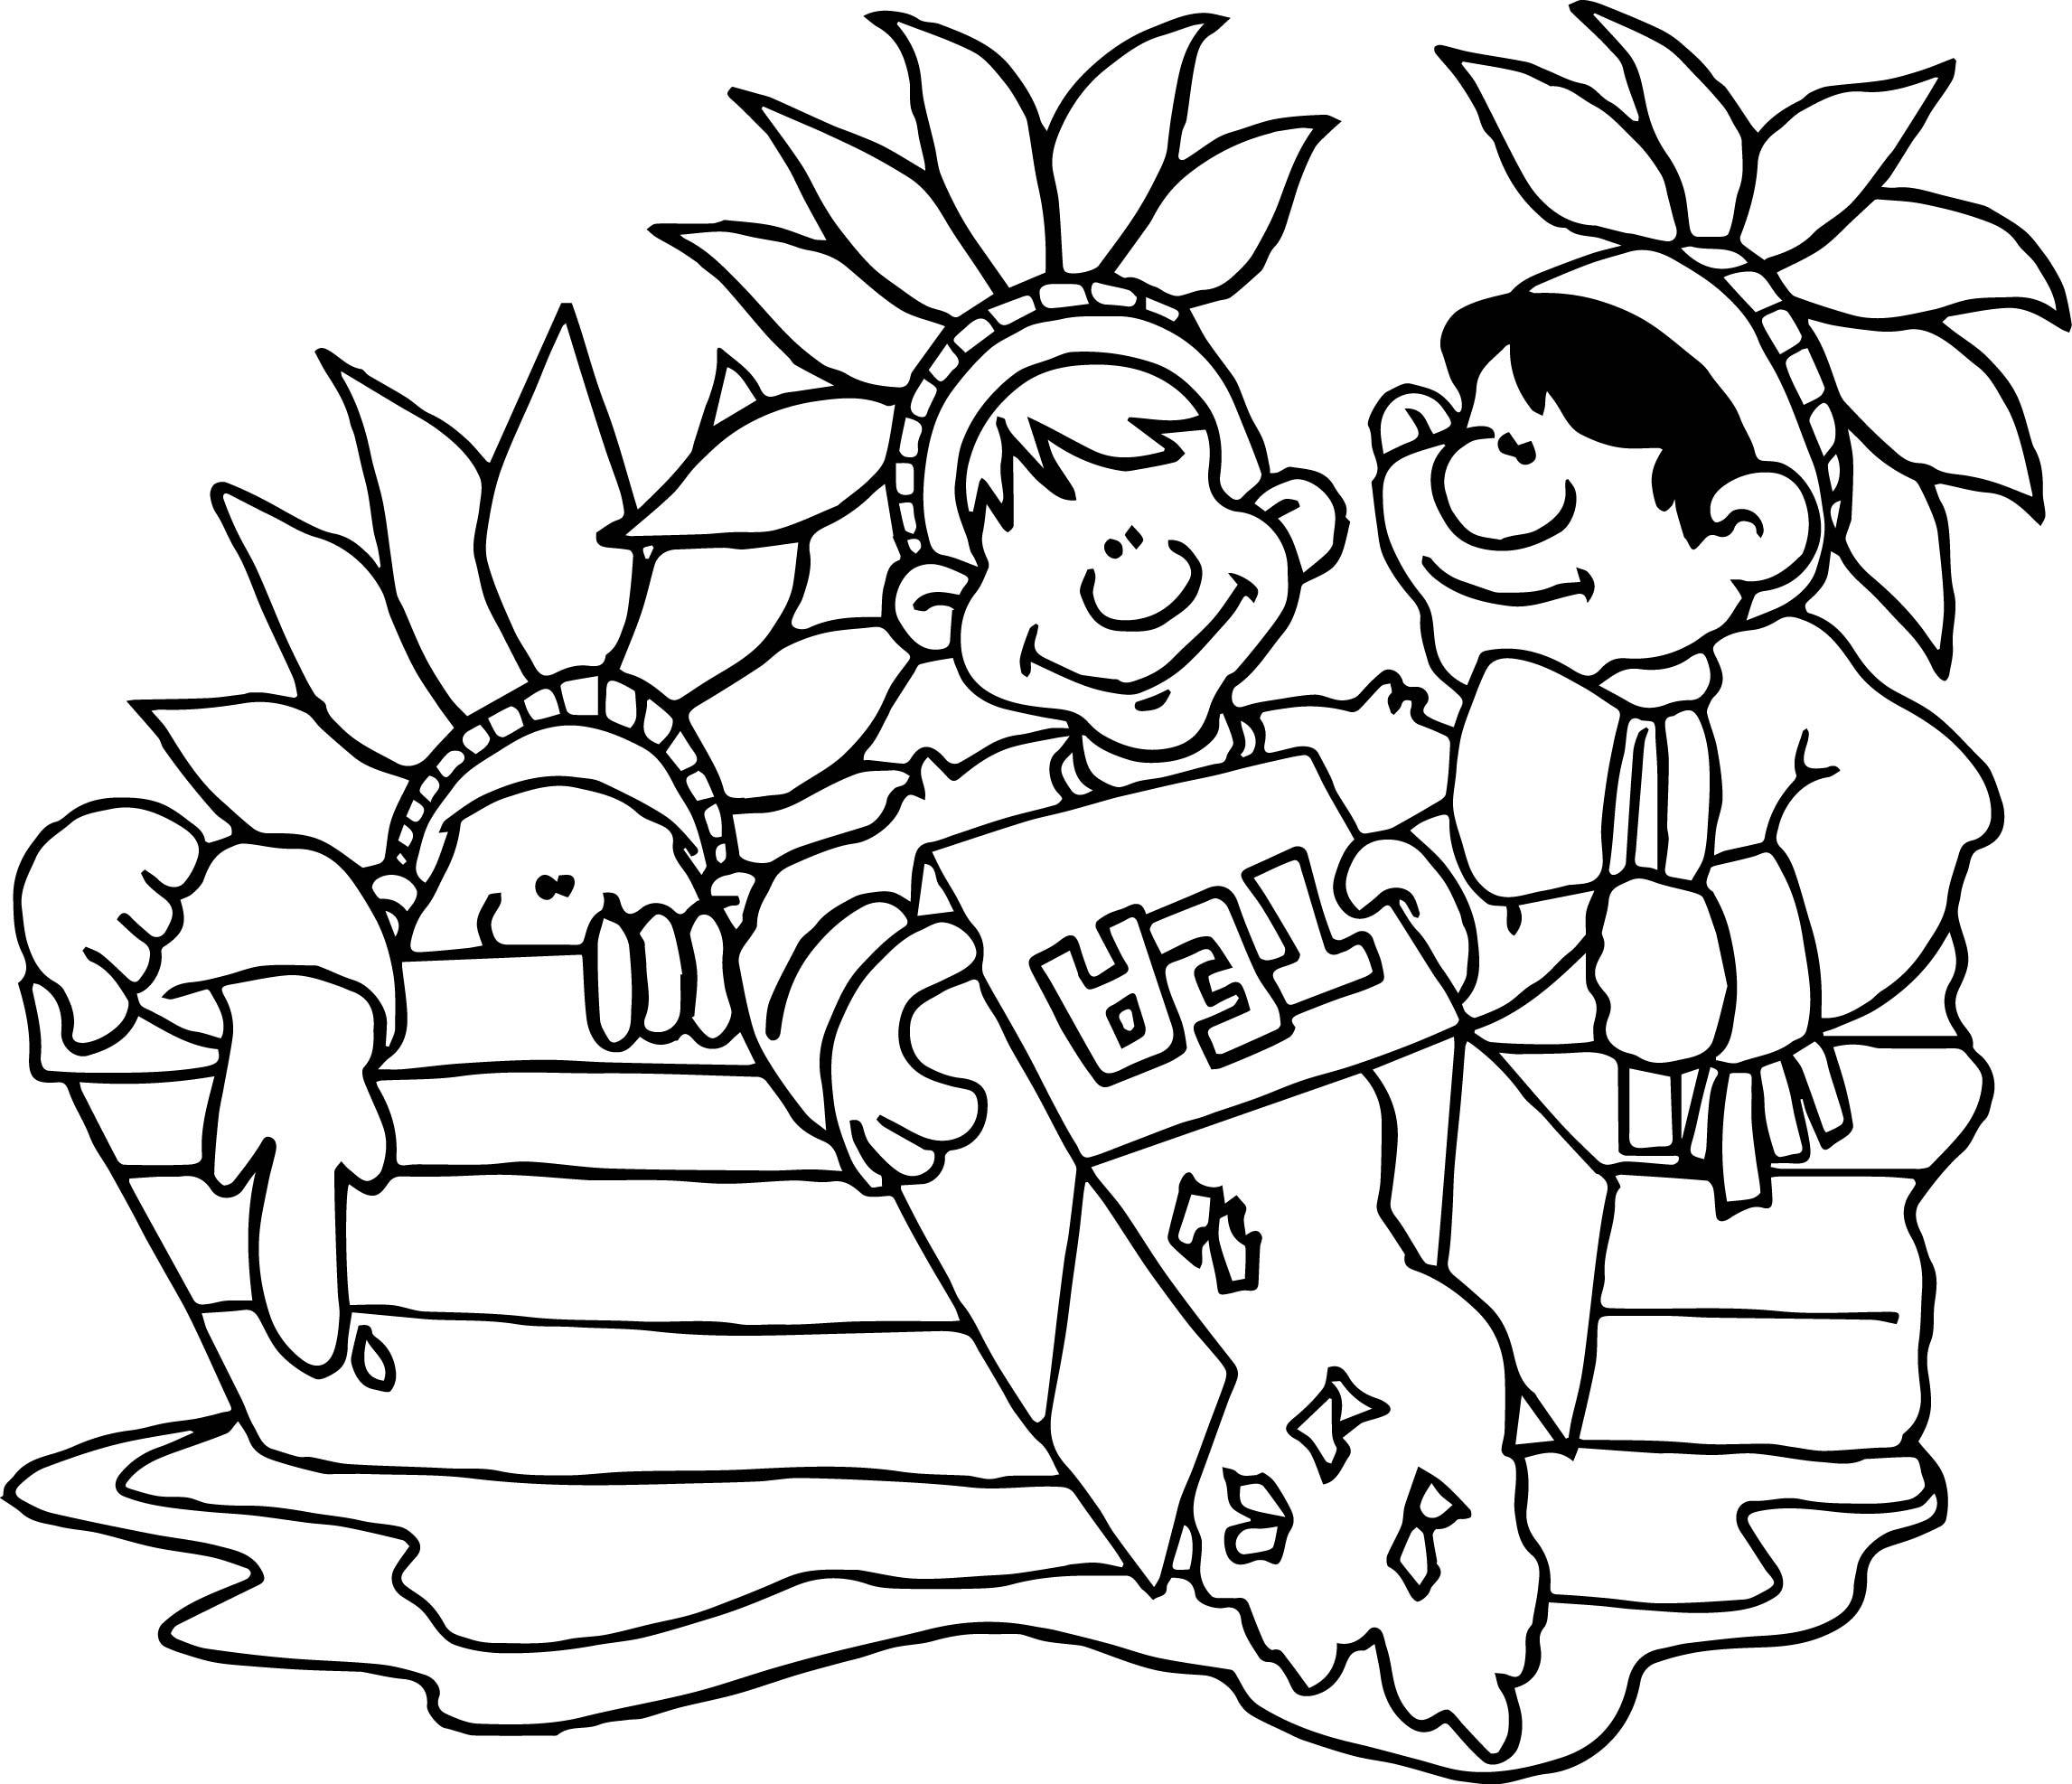 Boston Tea Party Coloring Coloring Pages